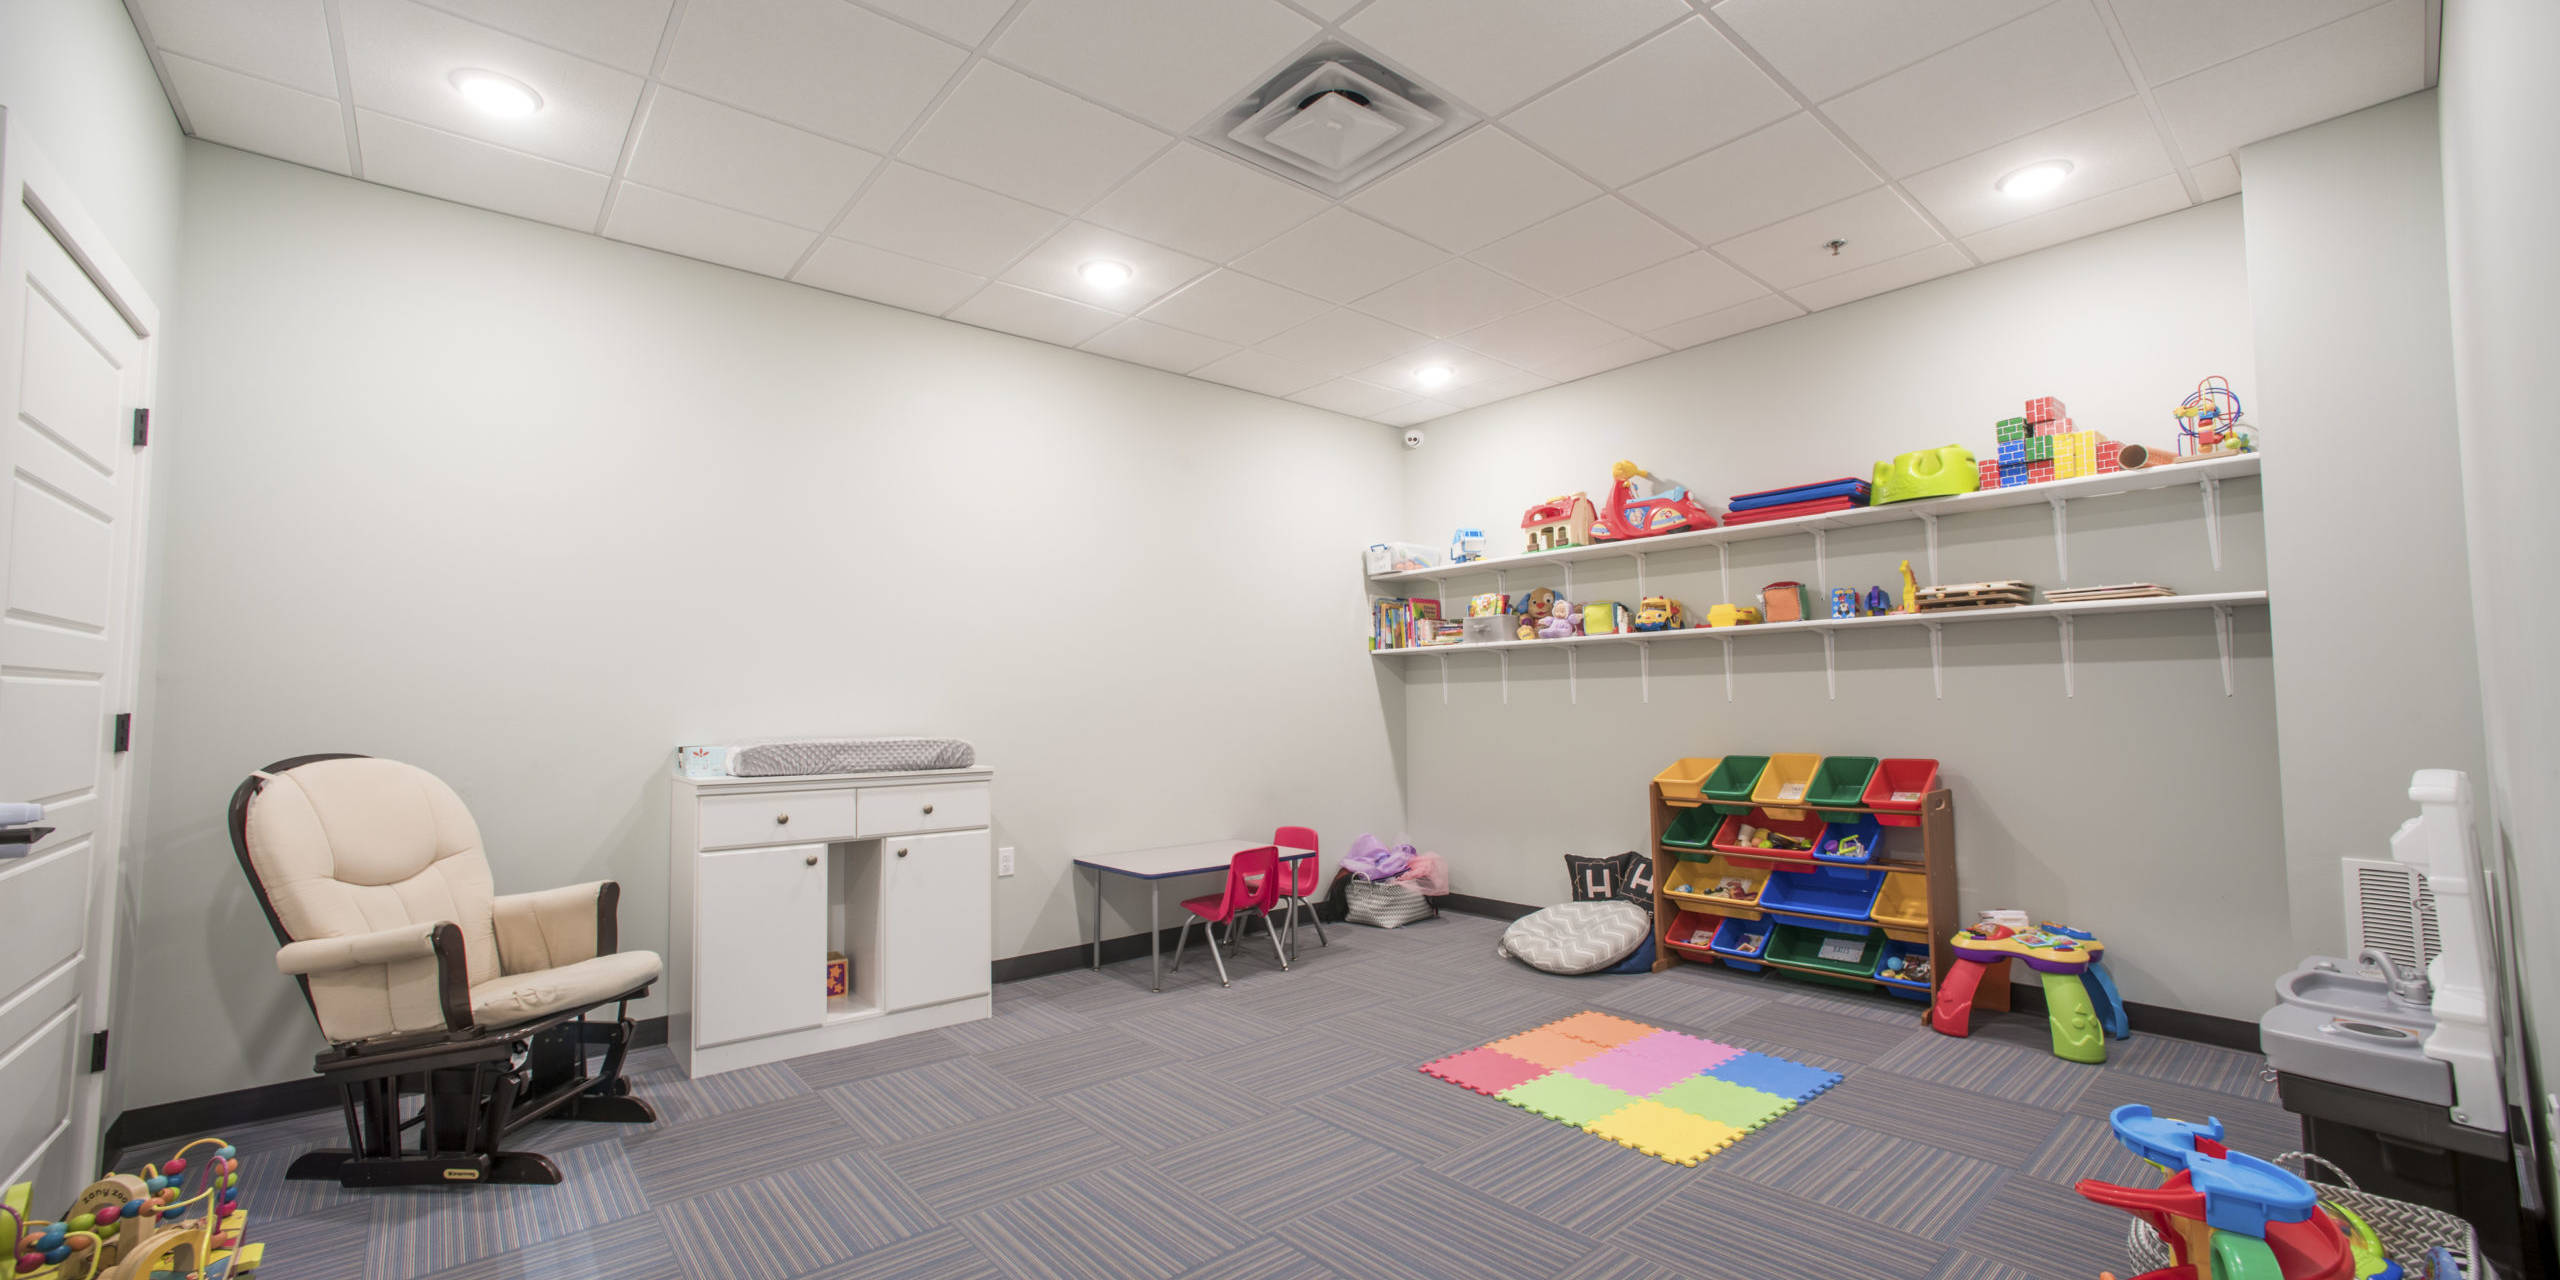 The childcare facility at The Hatchery